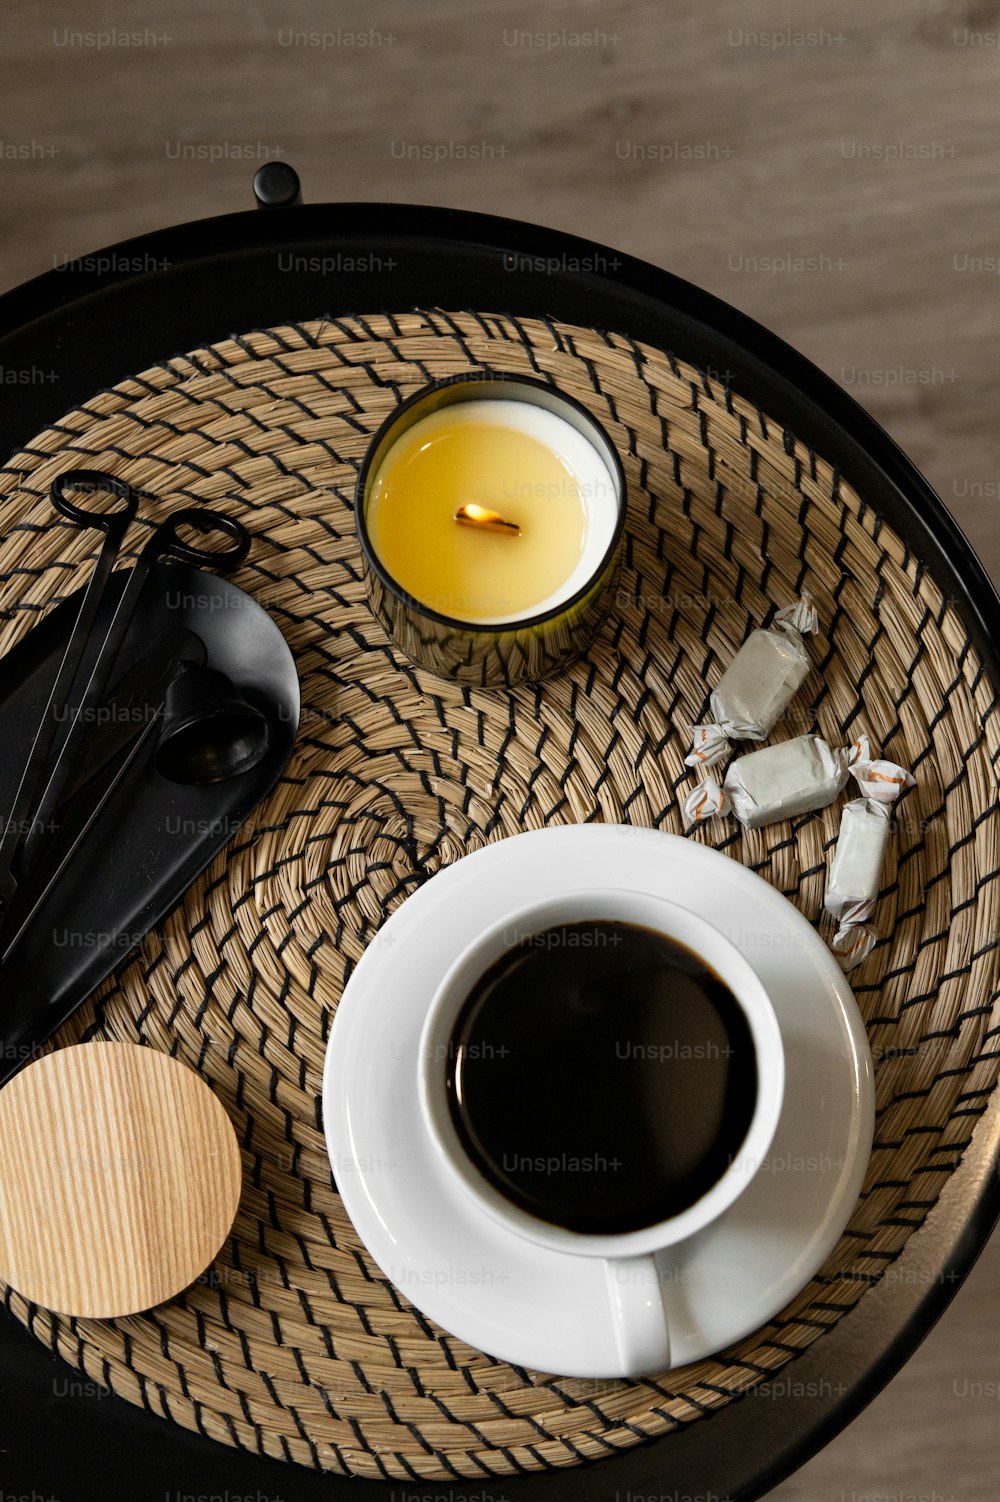 a cup of coffee, spoons, and a candle on a wicker tray